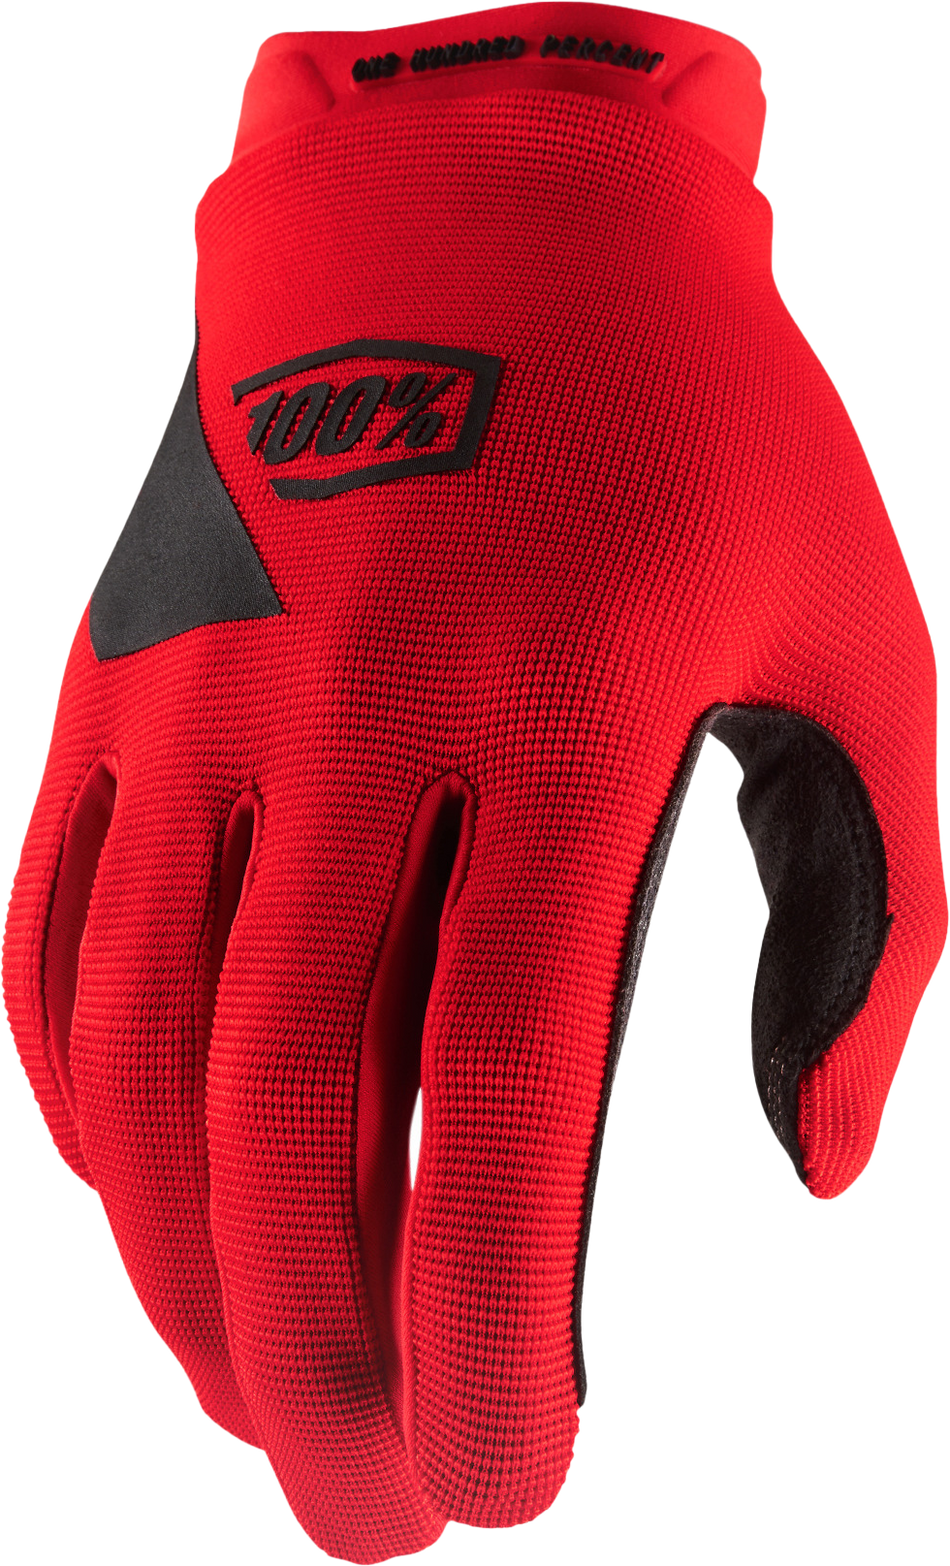 100% Ridecamp Gloves Red Lg 10011-00022